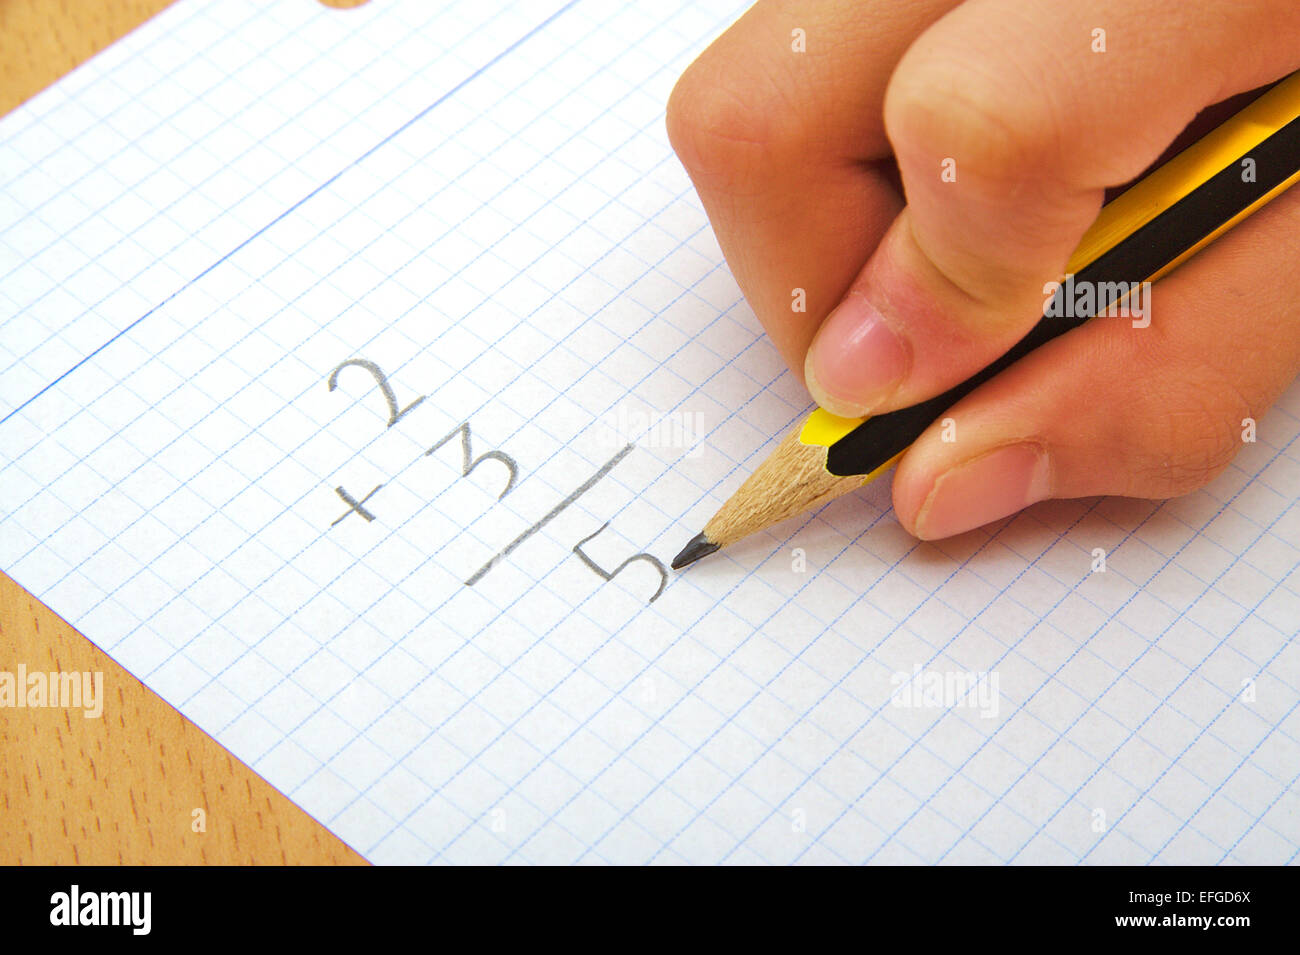 Hand of a child making a sum. Math. School concept Stock Photo